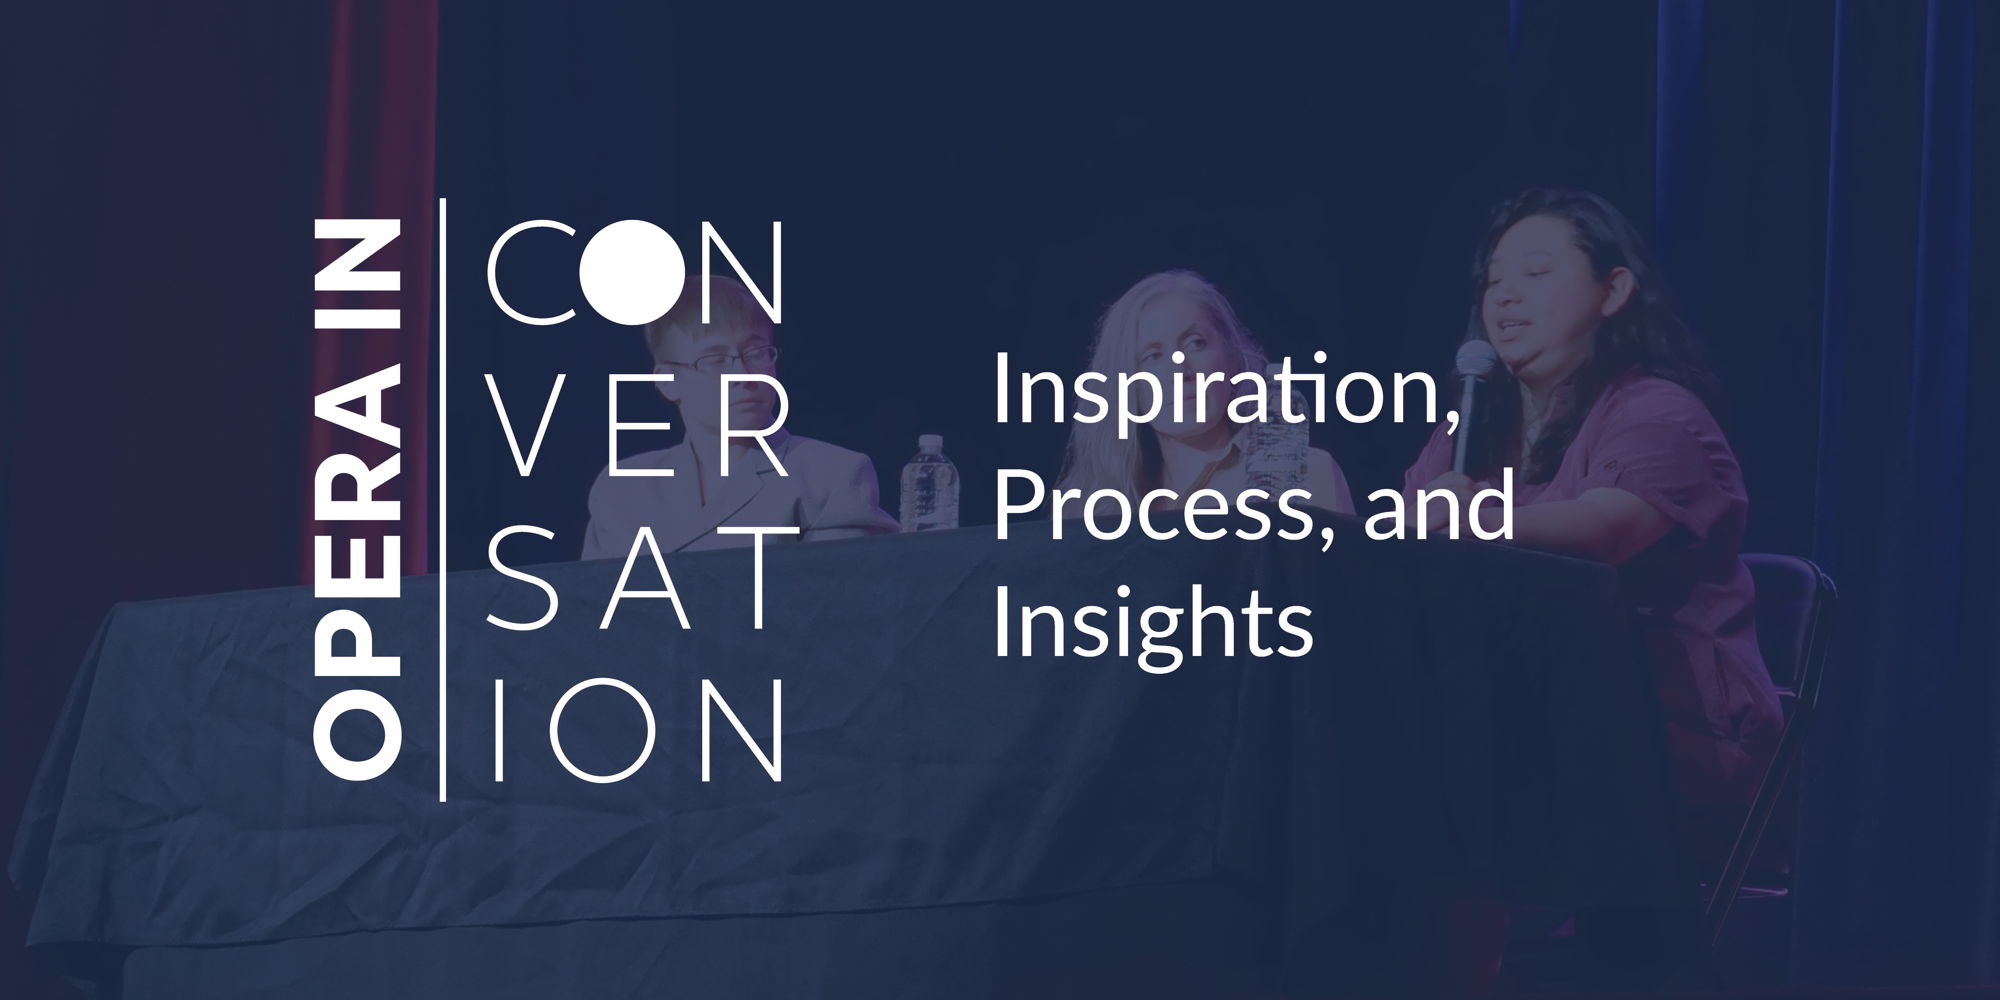 Opera in Conversation | Inspiration, Process and Insights promotional image